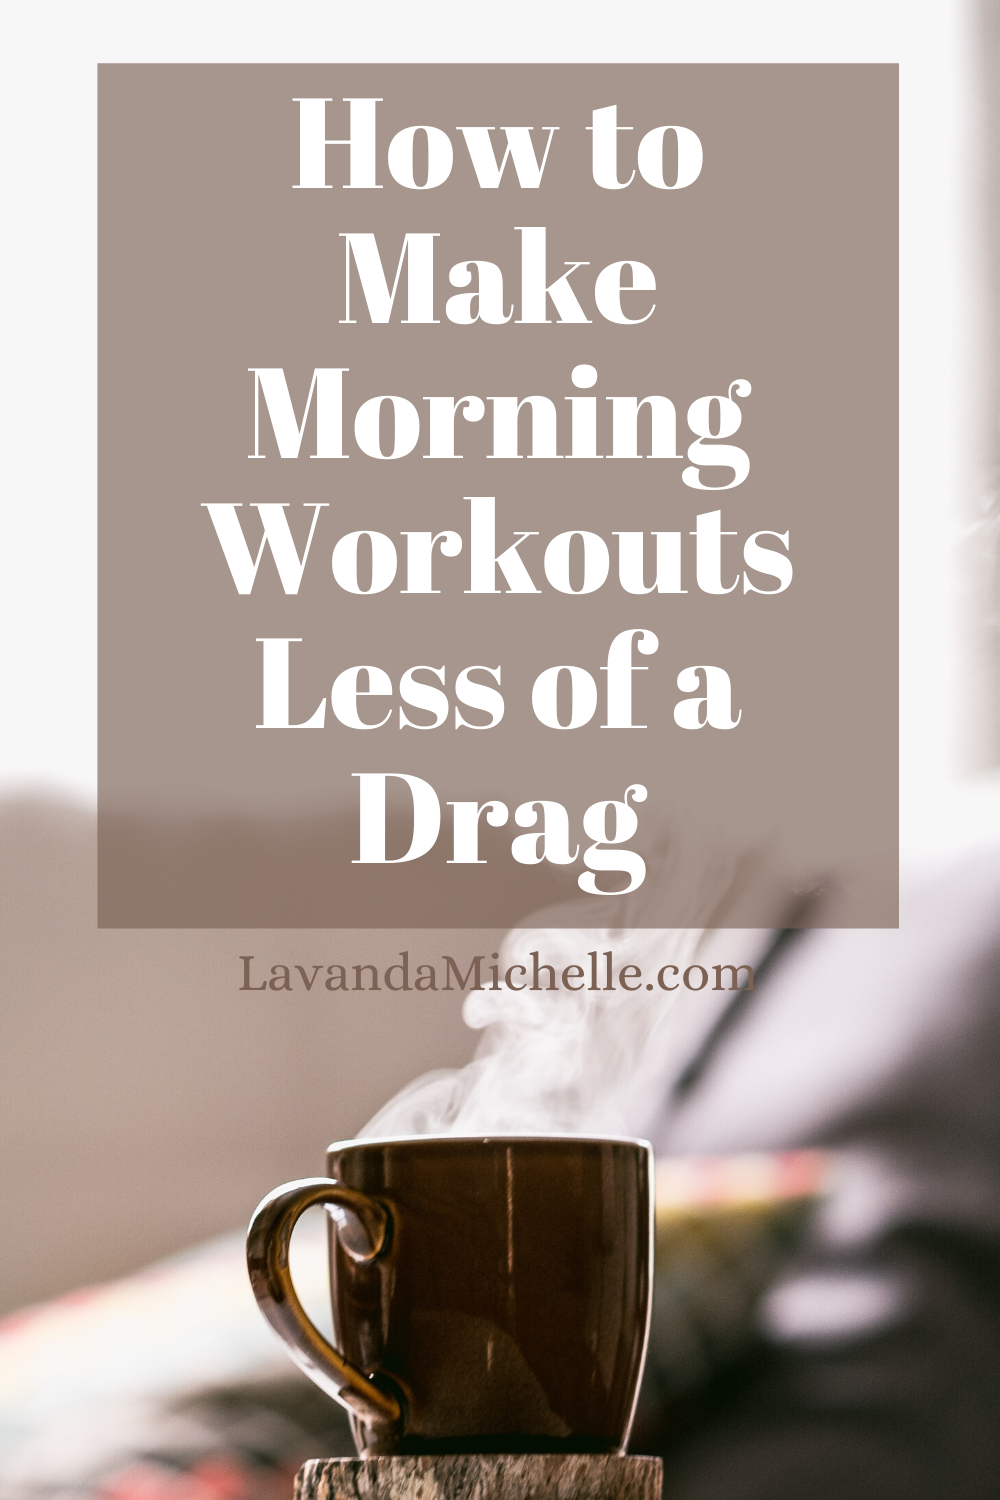 How to Make Morning Workouts Less of a Drag